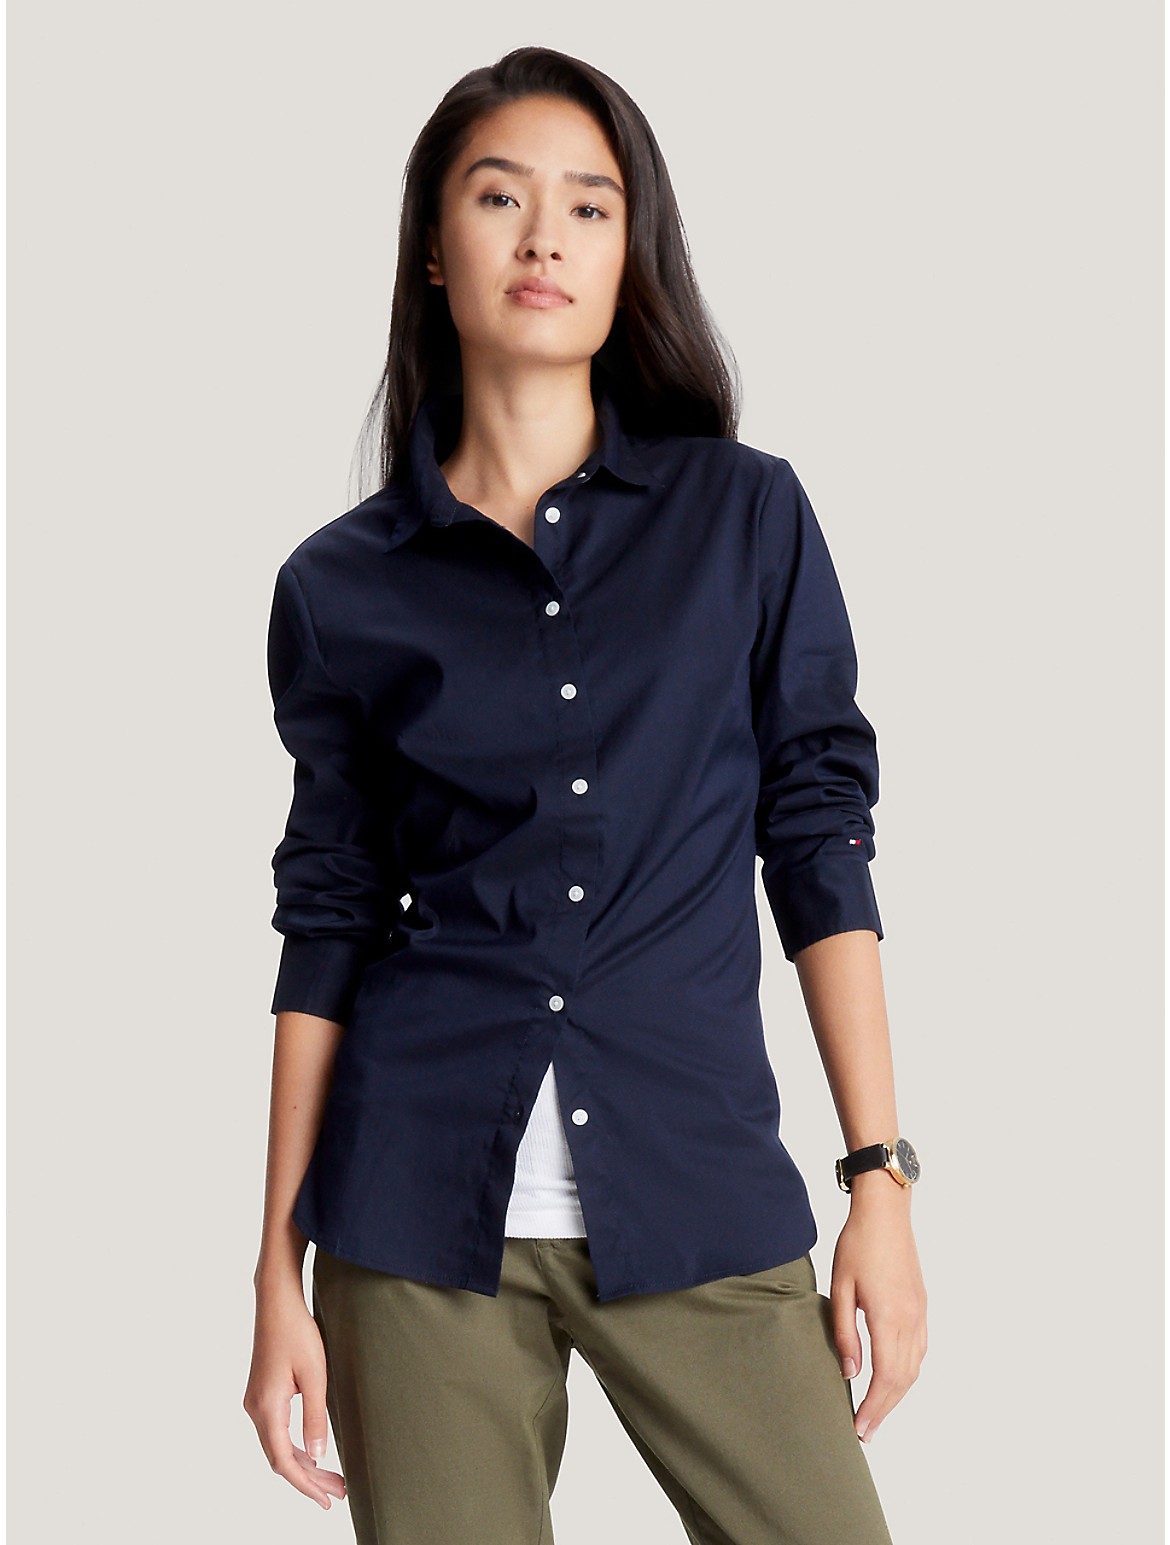 TOMMY HILFIGER Shirts for Women | ModeSens